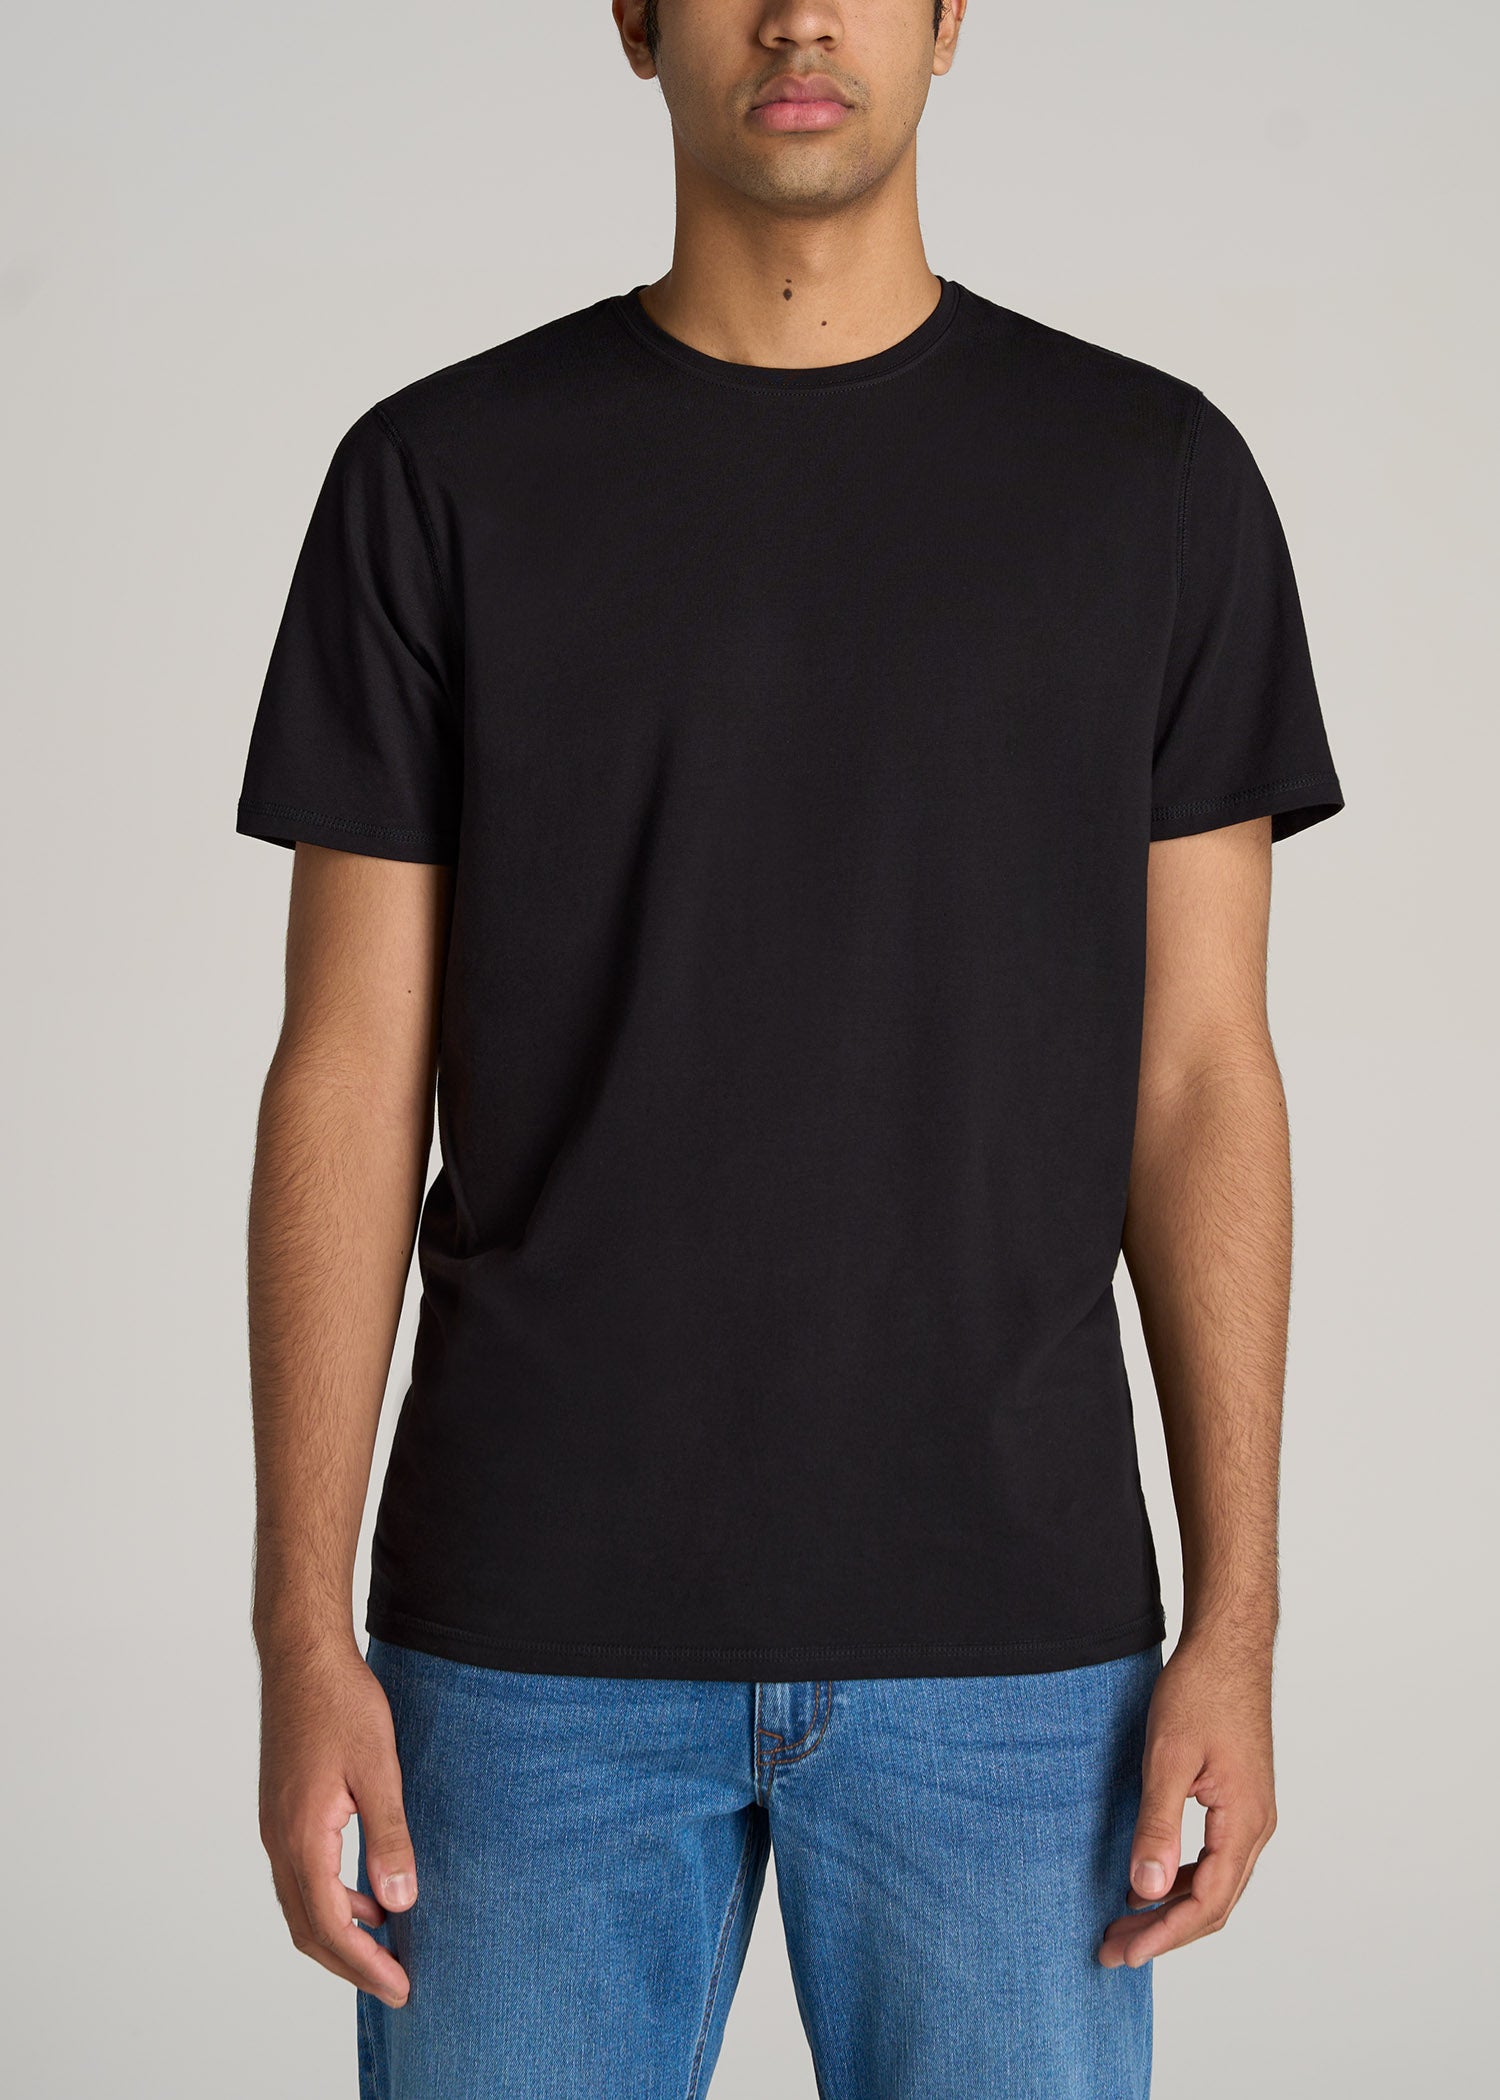 Buy Black Essential Crew Neck T-Shirt from Next Spain